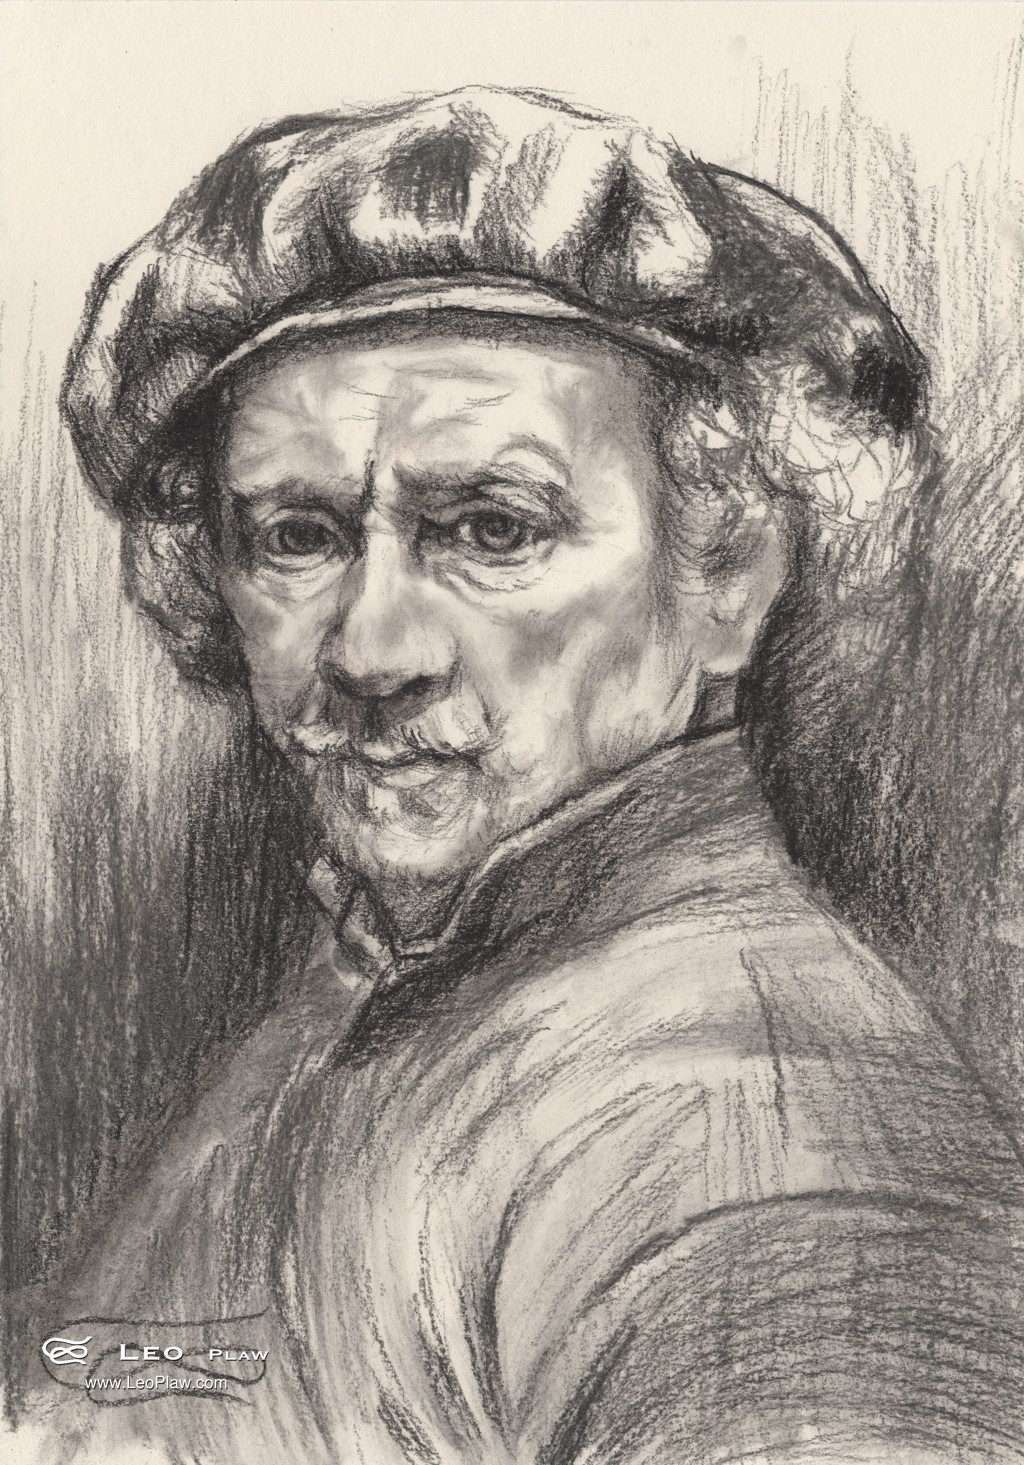 "Rembrandt", Leo Plaw, 24x34cm, pencil and charcoal on paper